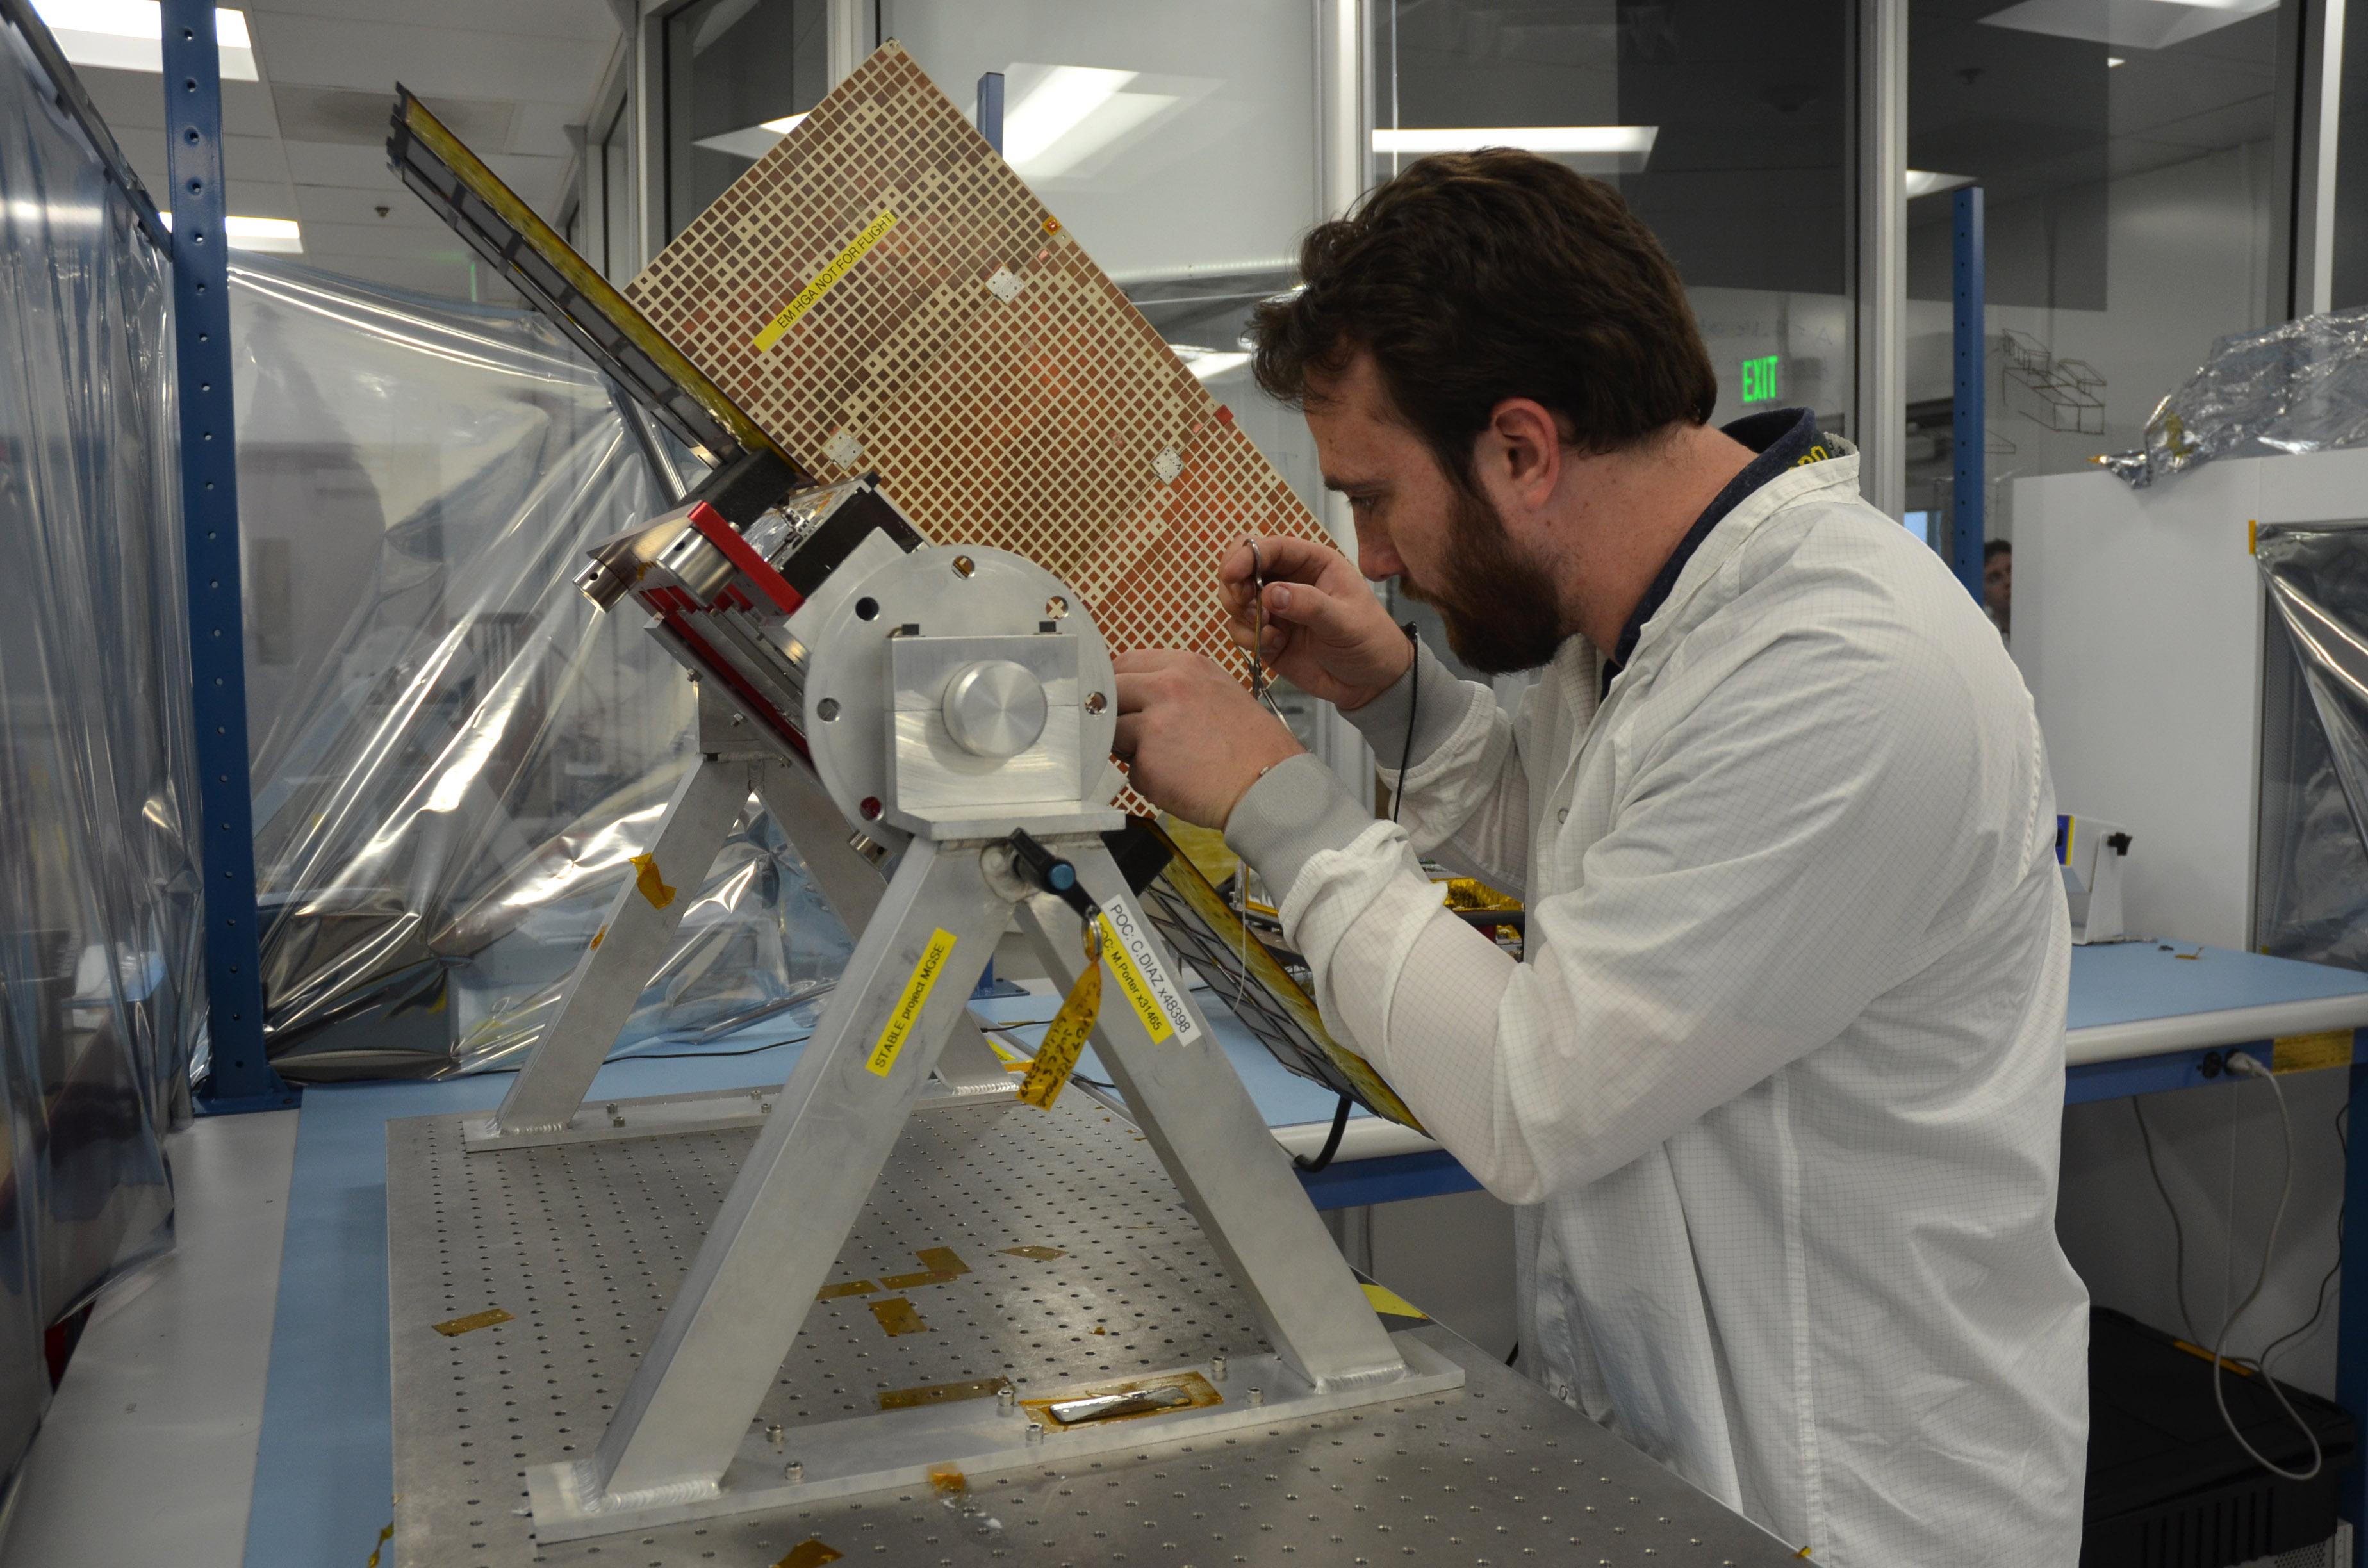 Joel Steinkraus, lead mechanical engineer for the MarCO (Mars Cube One) CubeSat spacecraft, adjusts a model of one of the two spacecraft.